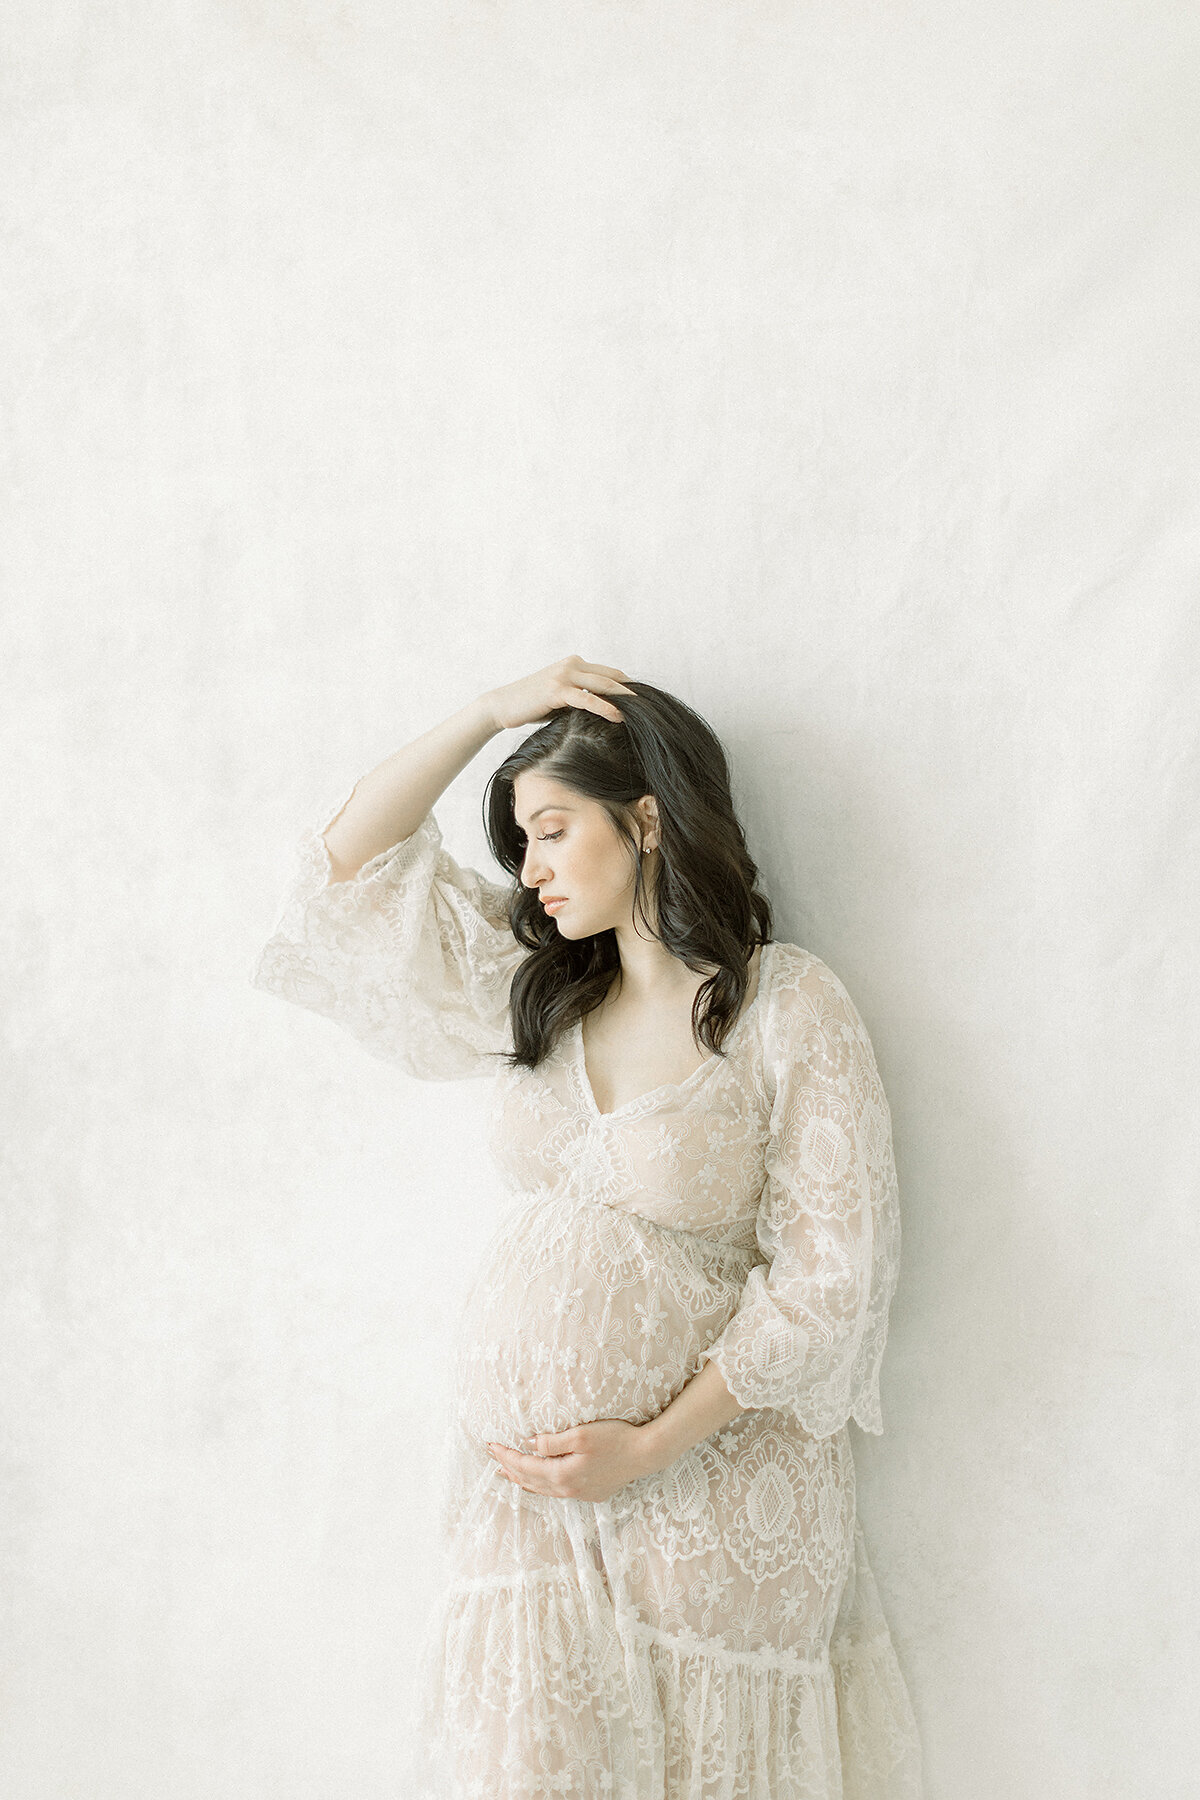 A maternity photo of a mother posing in a Dallas photography studio by the window as she is gently holding her hair with one hand and the other holding her belly.